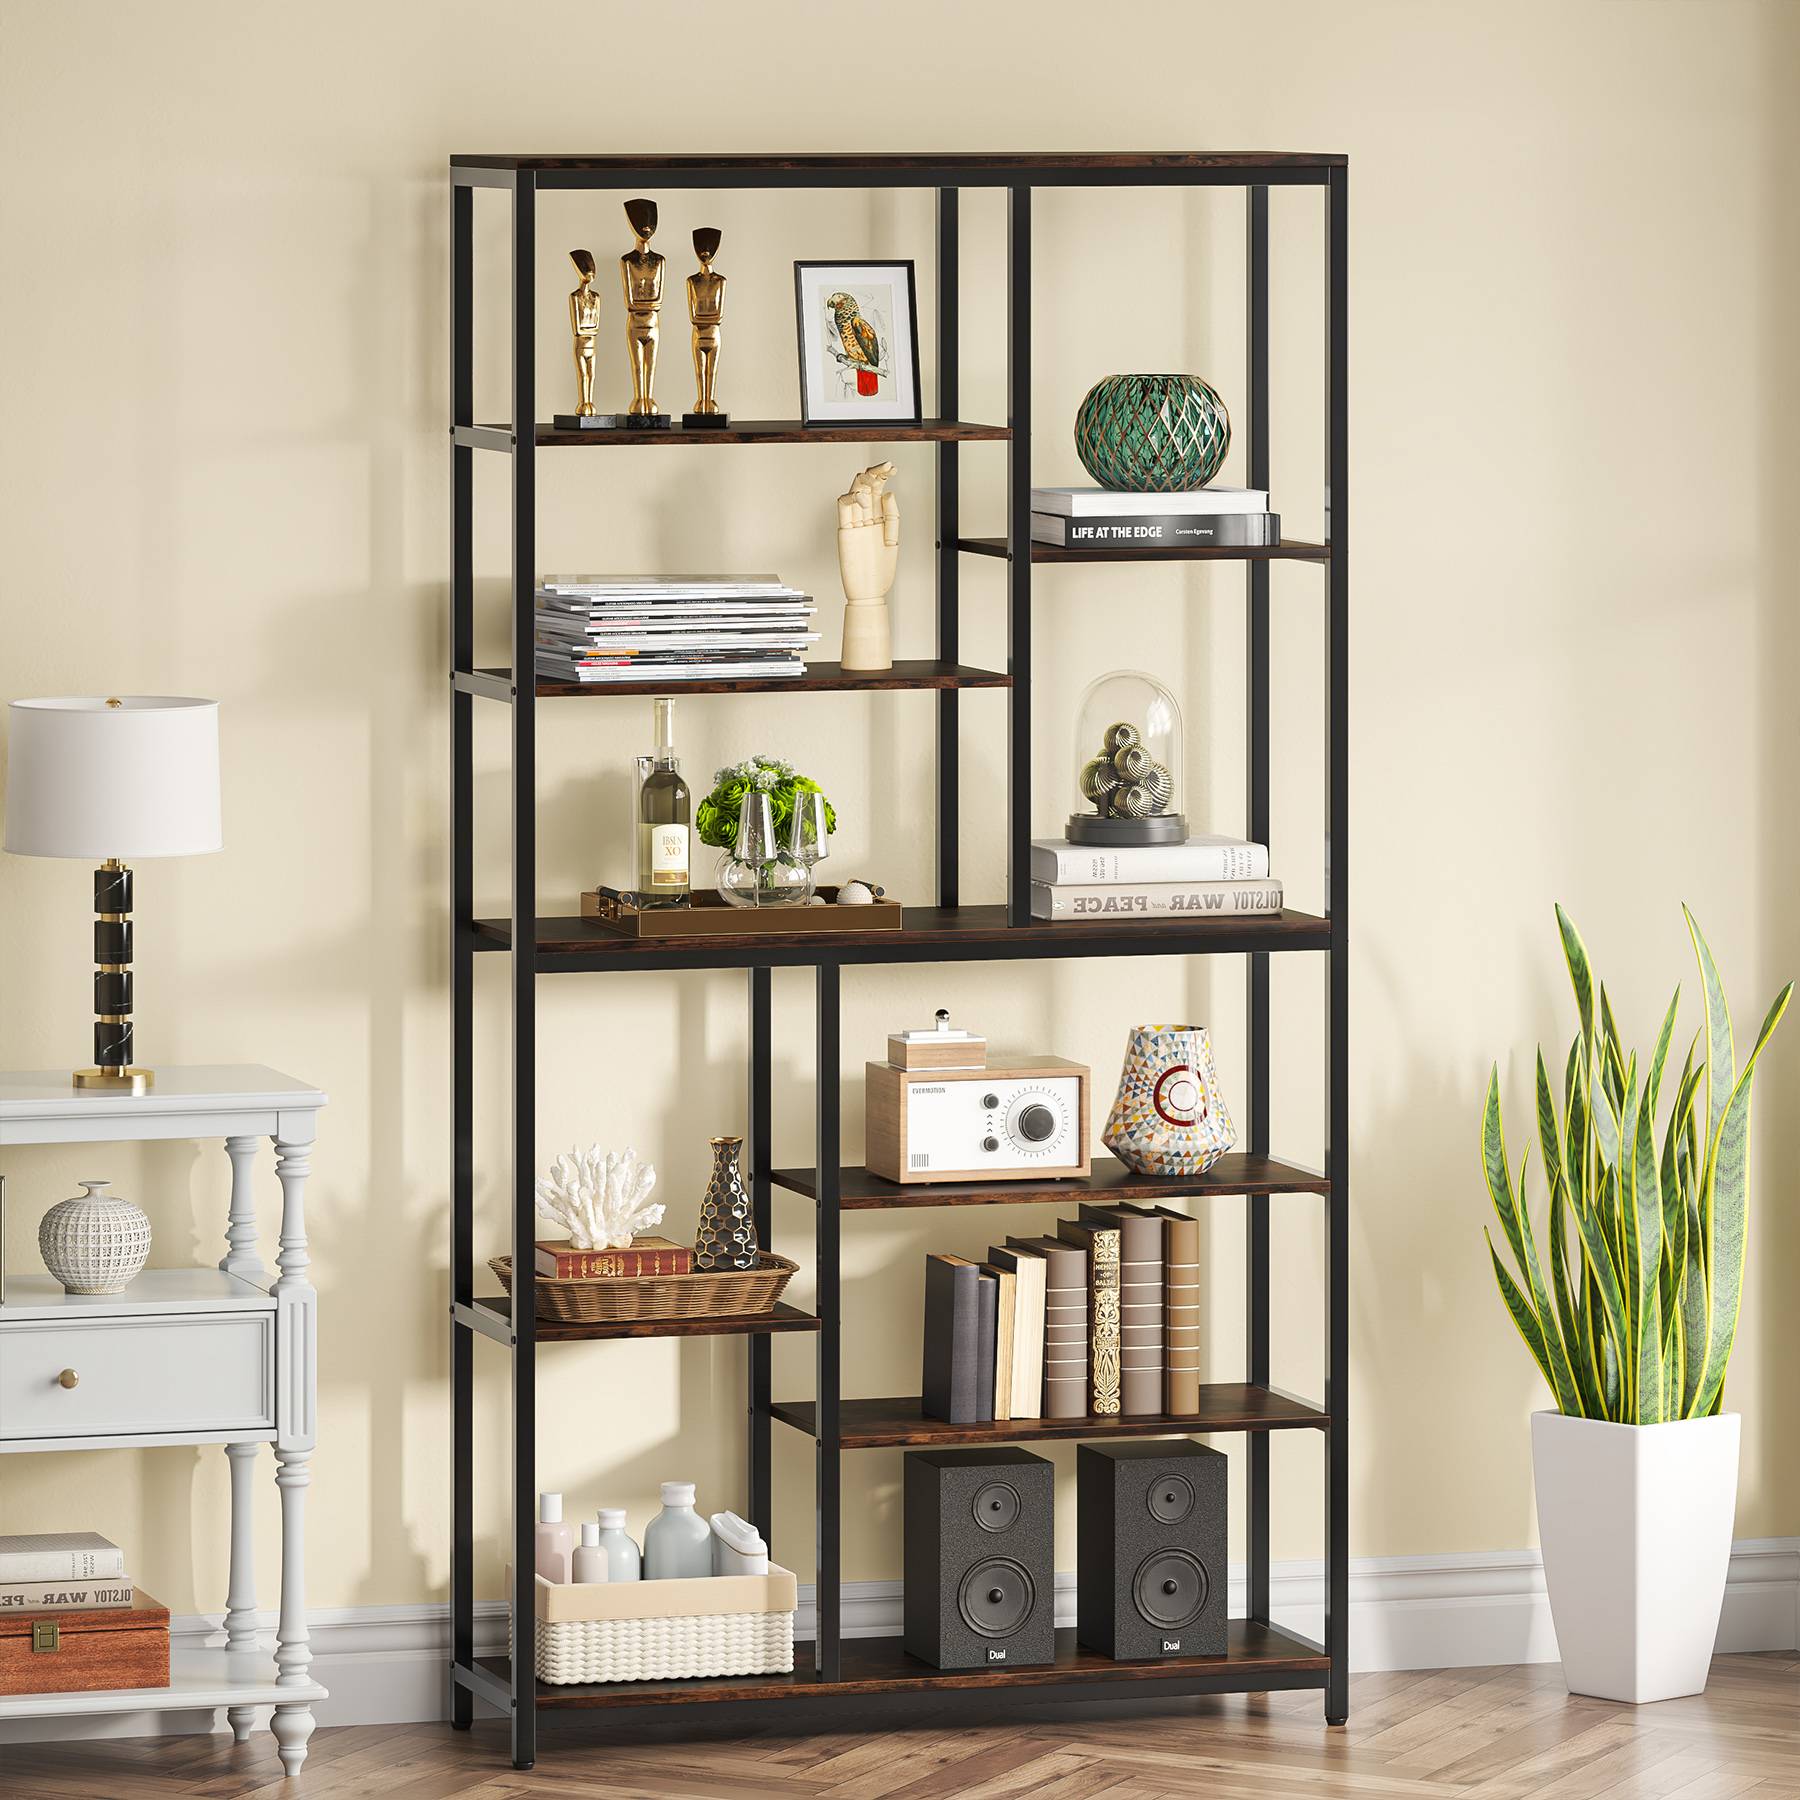 79 Inch Extra Tall Bookshelf, 7-Tier Vintage Bookcase, Industrial